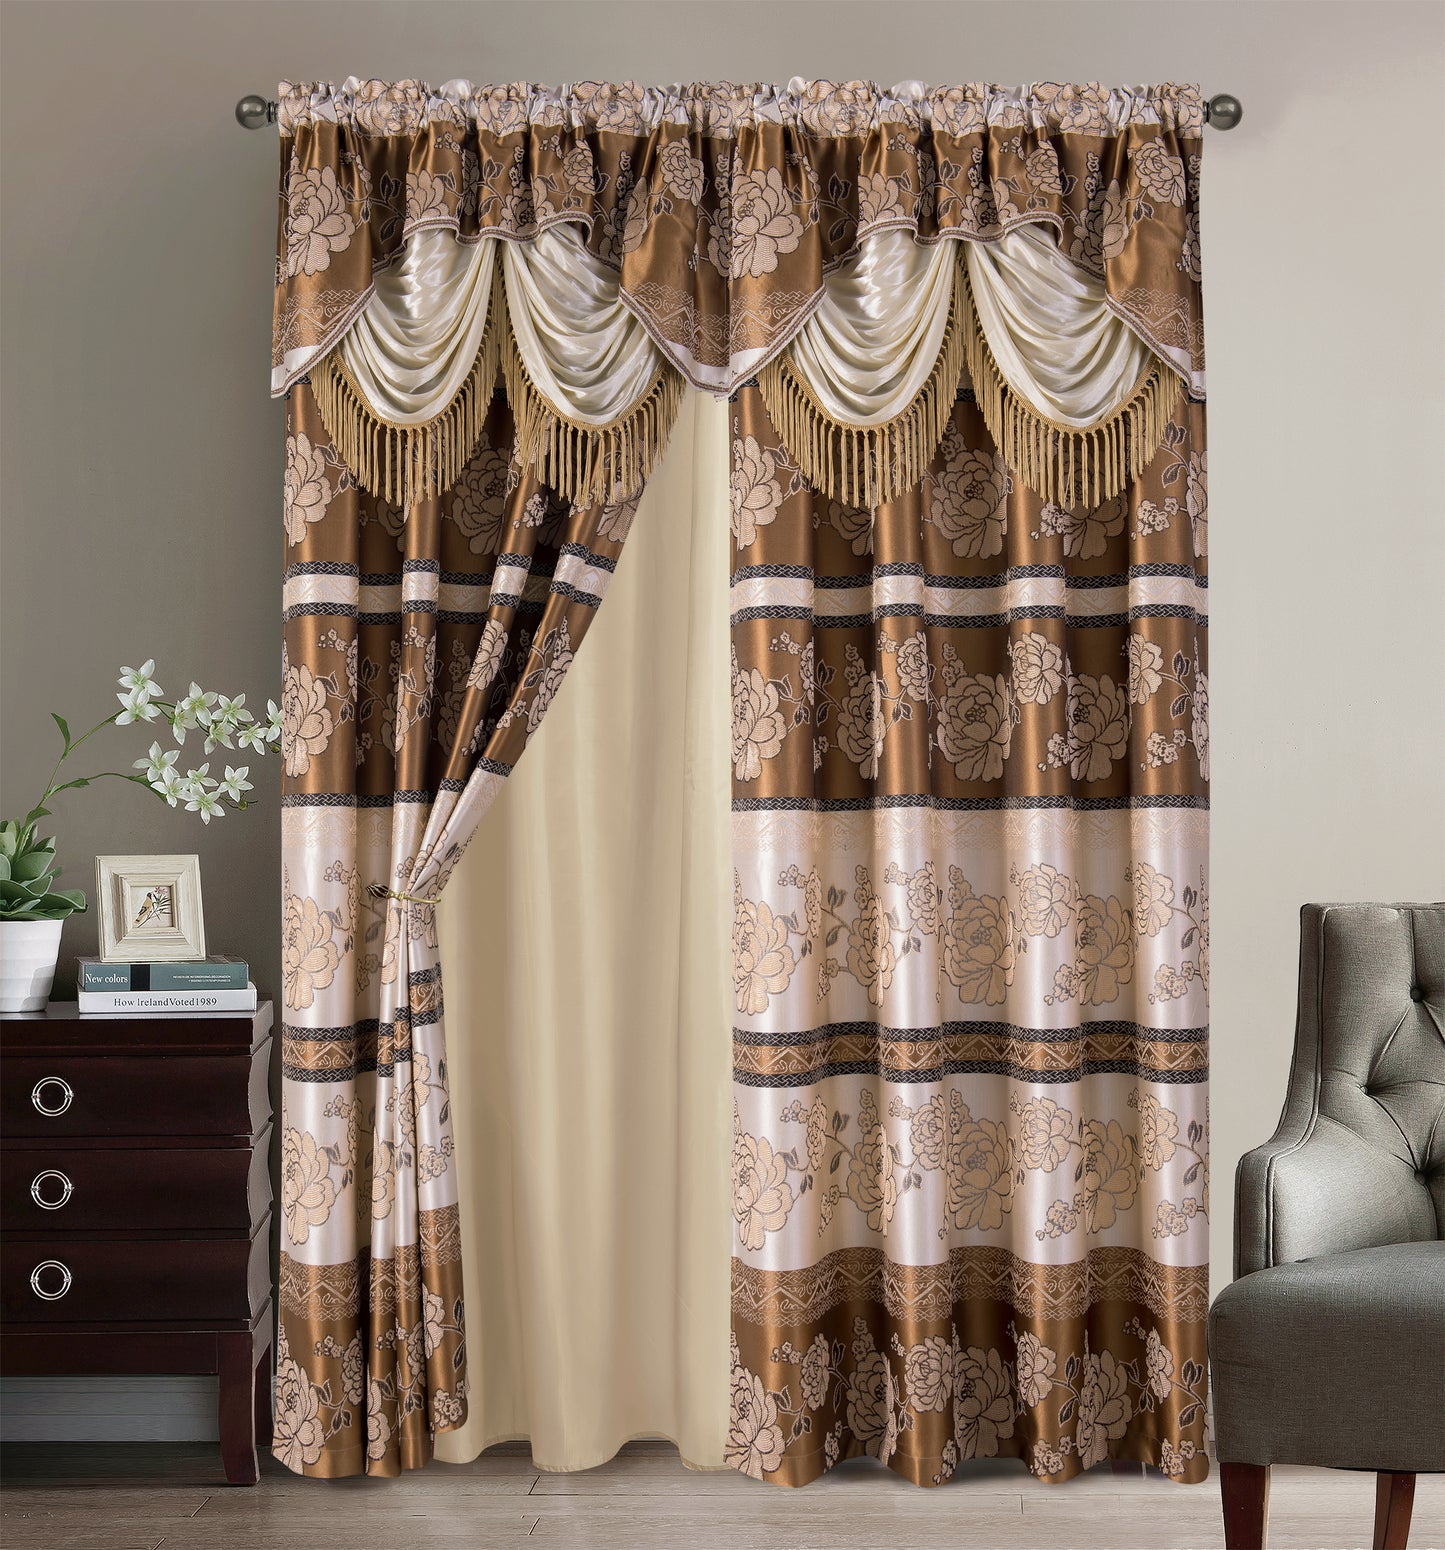 2PC CURTAIN SET W/ ATTACHED VALANCE & BACKING - Bonnie